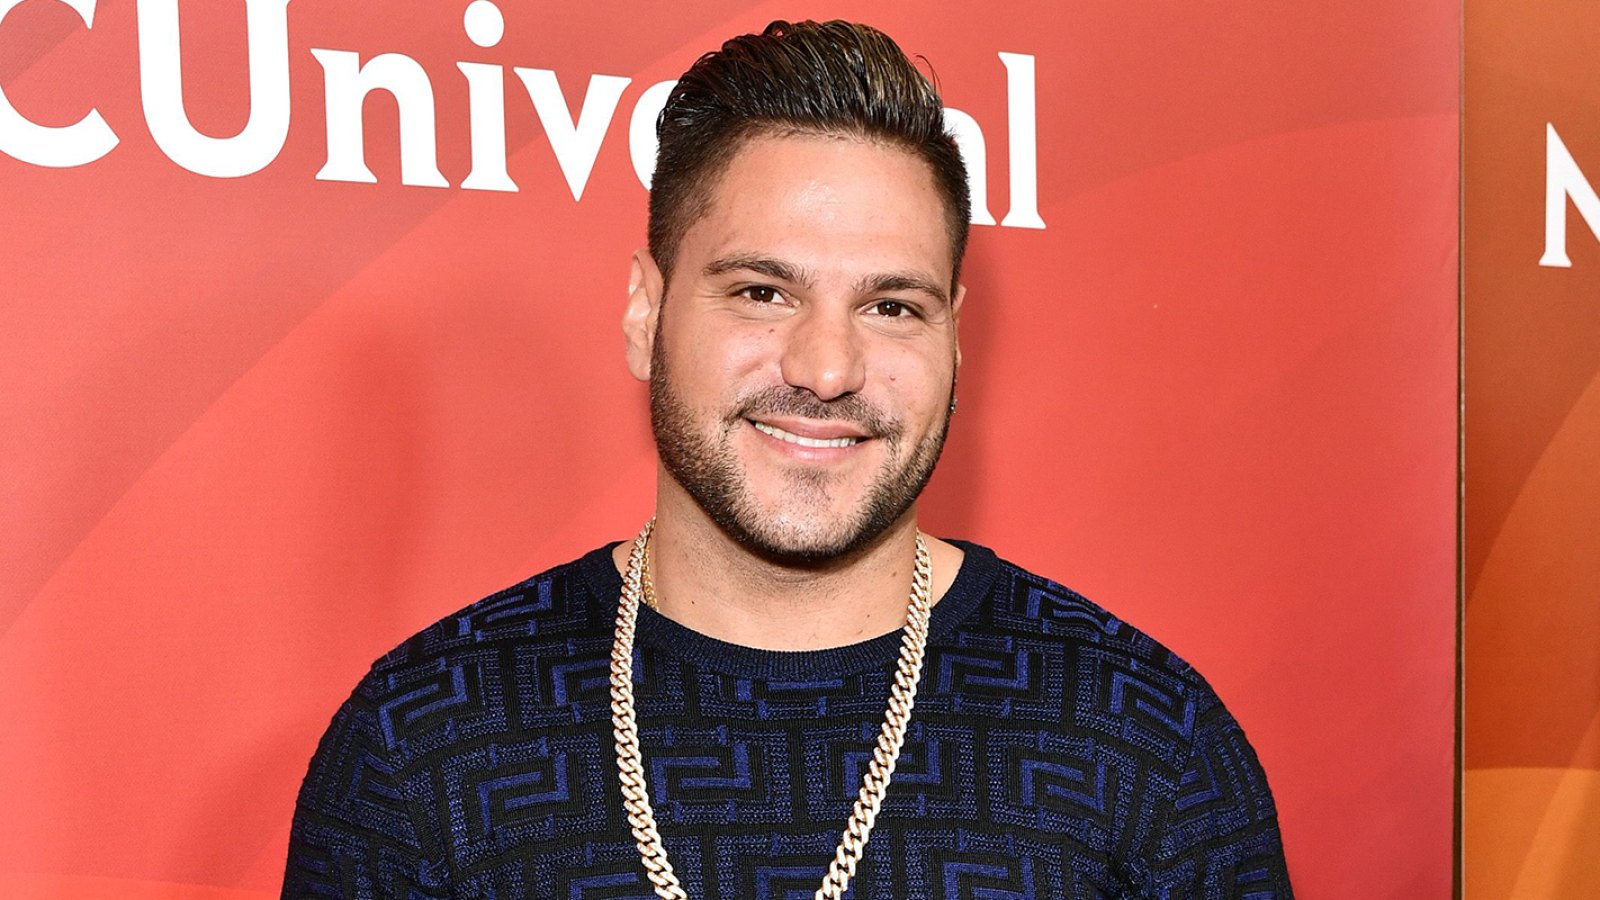 Ronnie Ortiz-Magro Is Sober and 'Living a Good Life' After Arrest, Plans to Return to 'Jersey Shore'